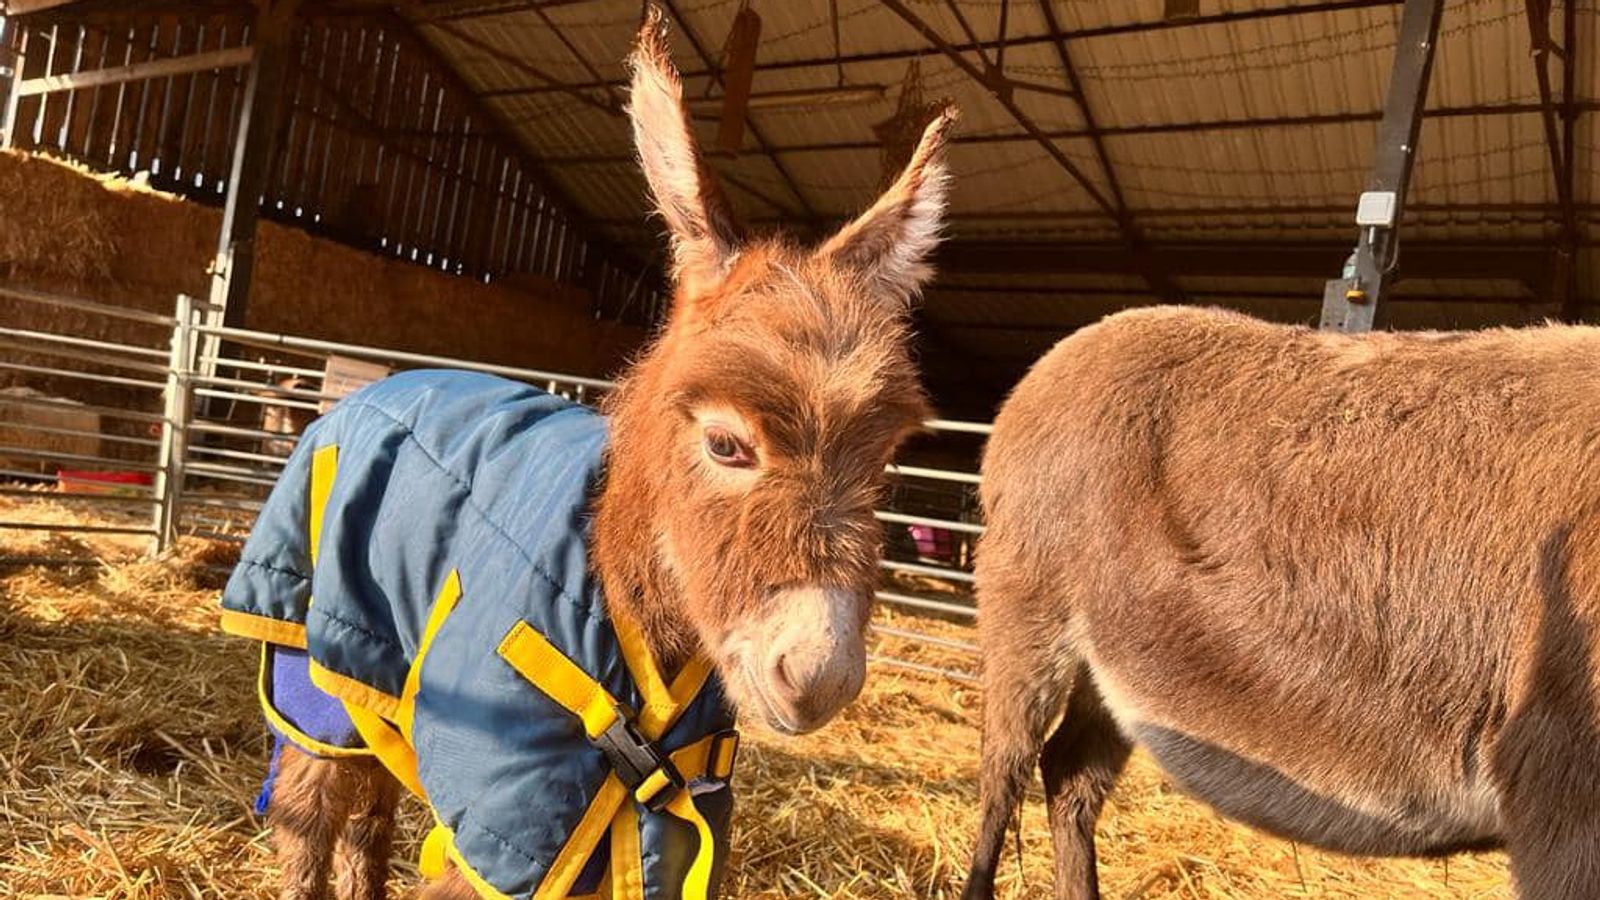 Man and youth arrested after baby donkey Moon stolen from ...